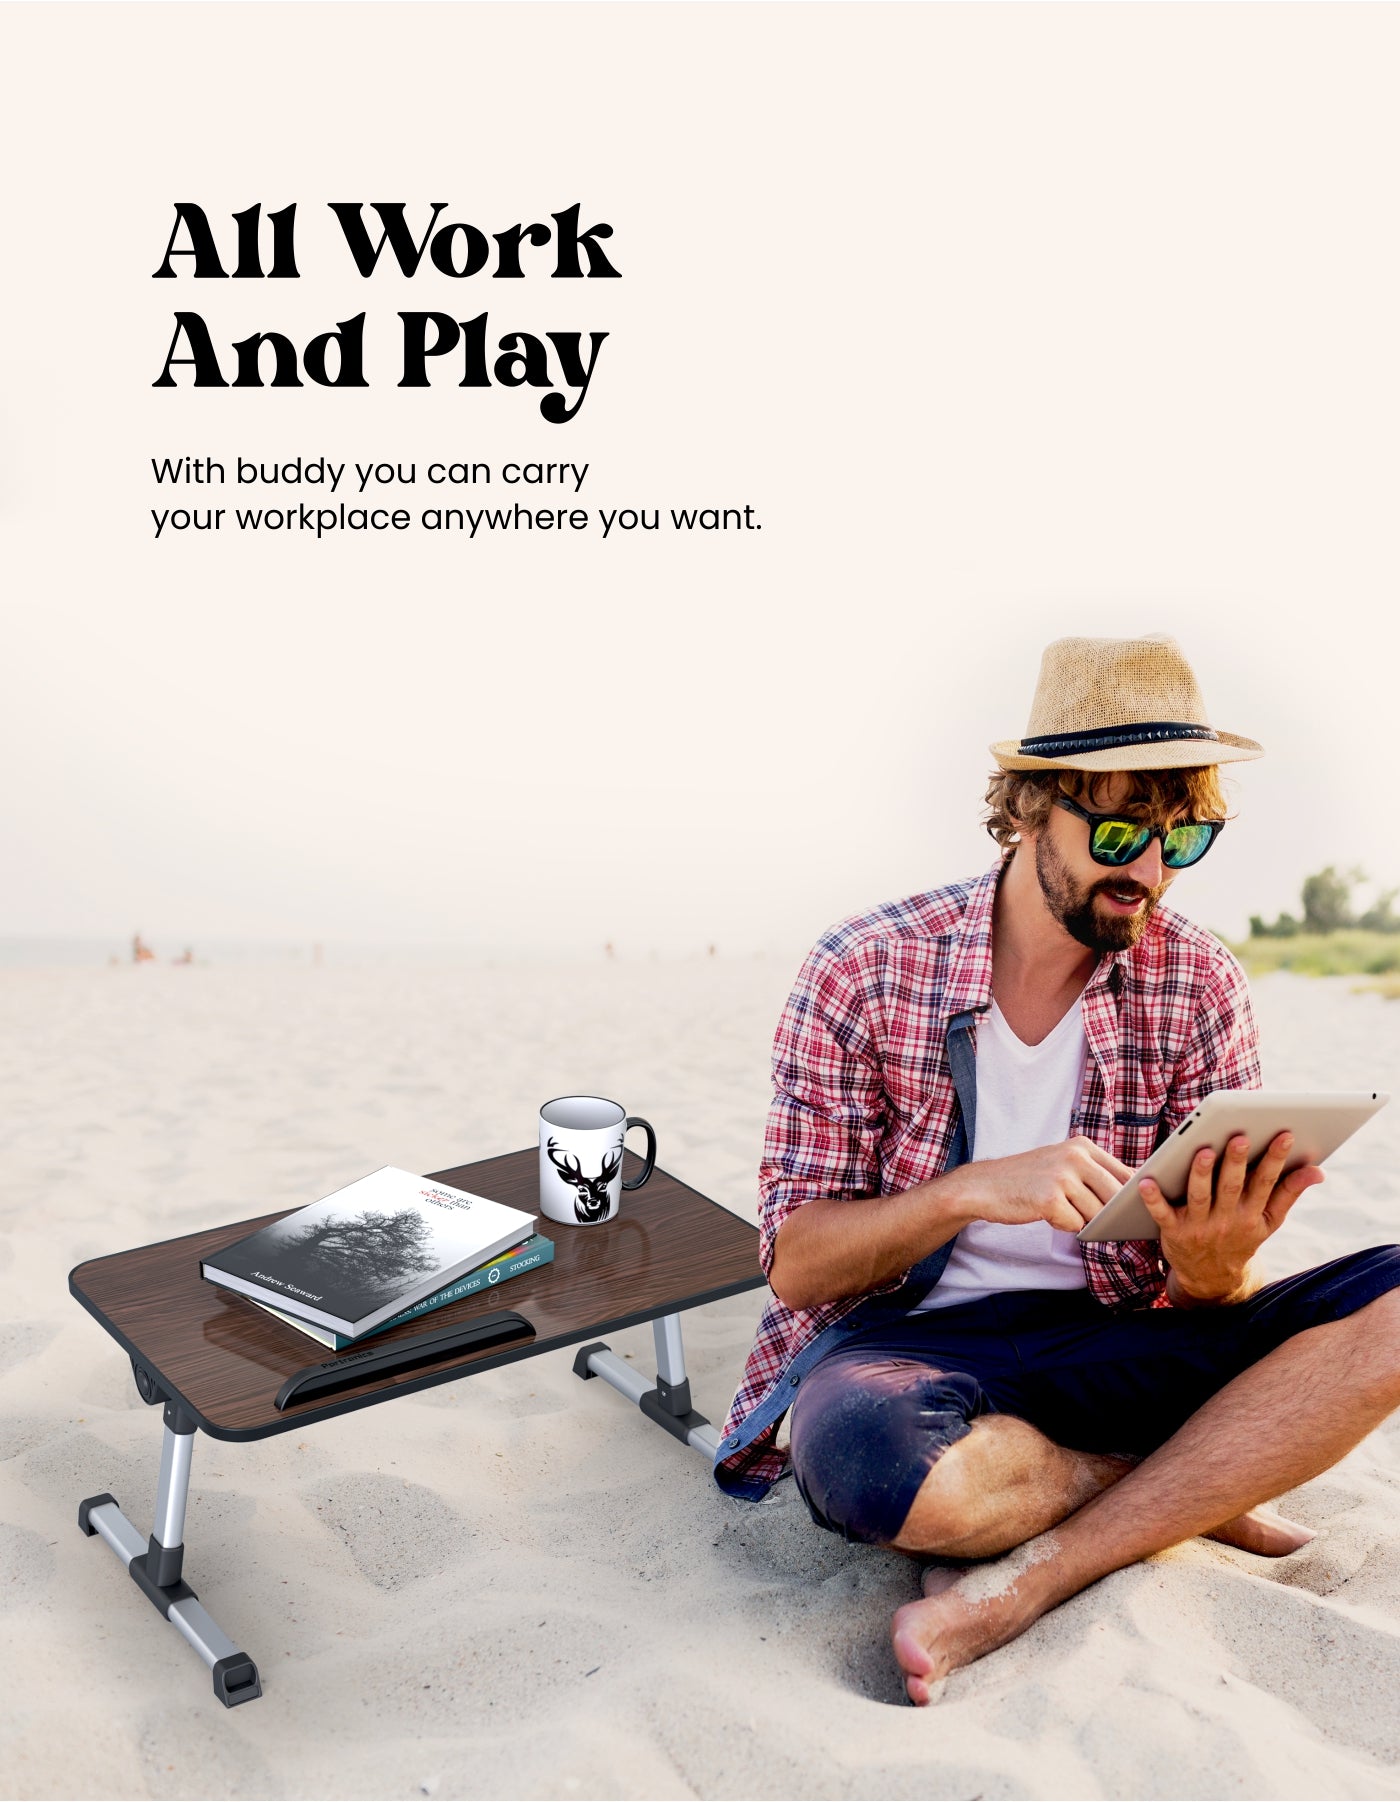 Portronics My Buddy adjustable and portable Laptop Stand for bed all work and play